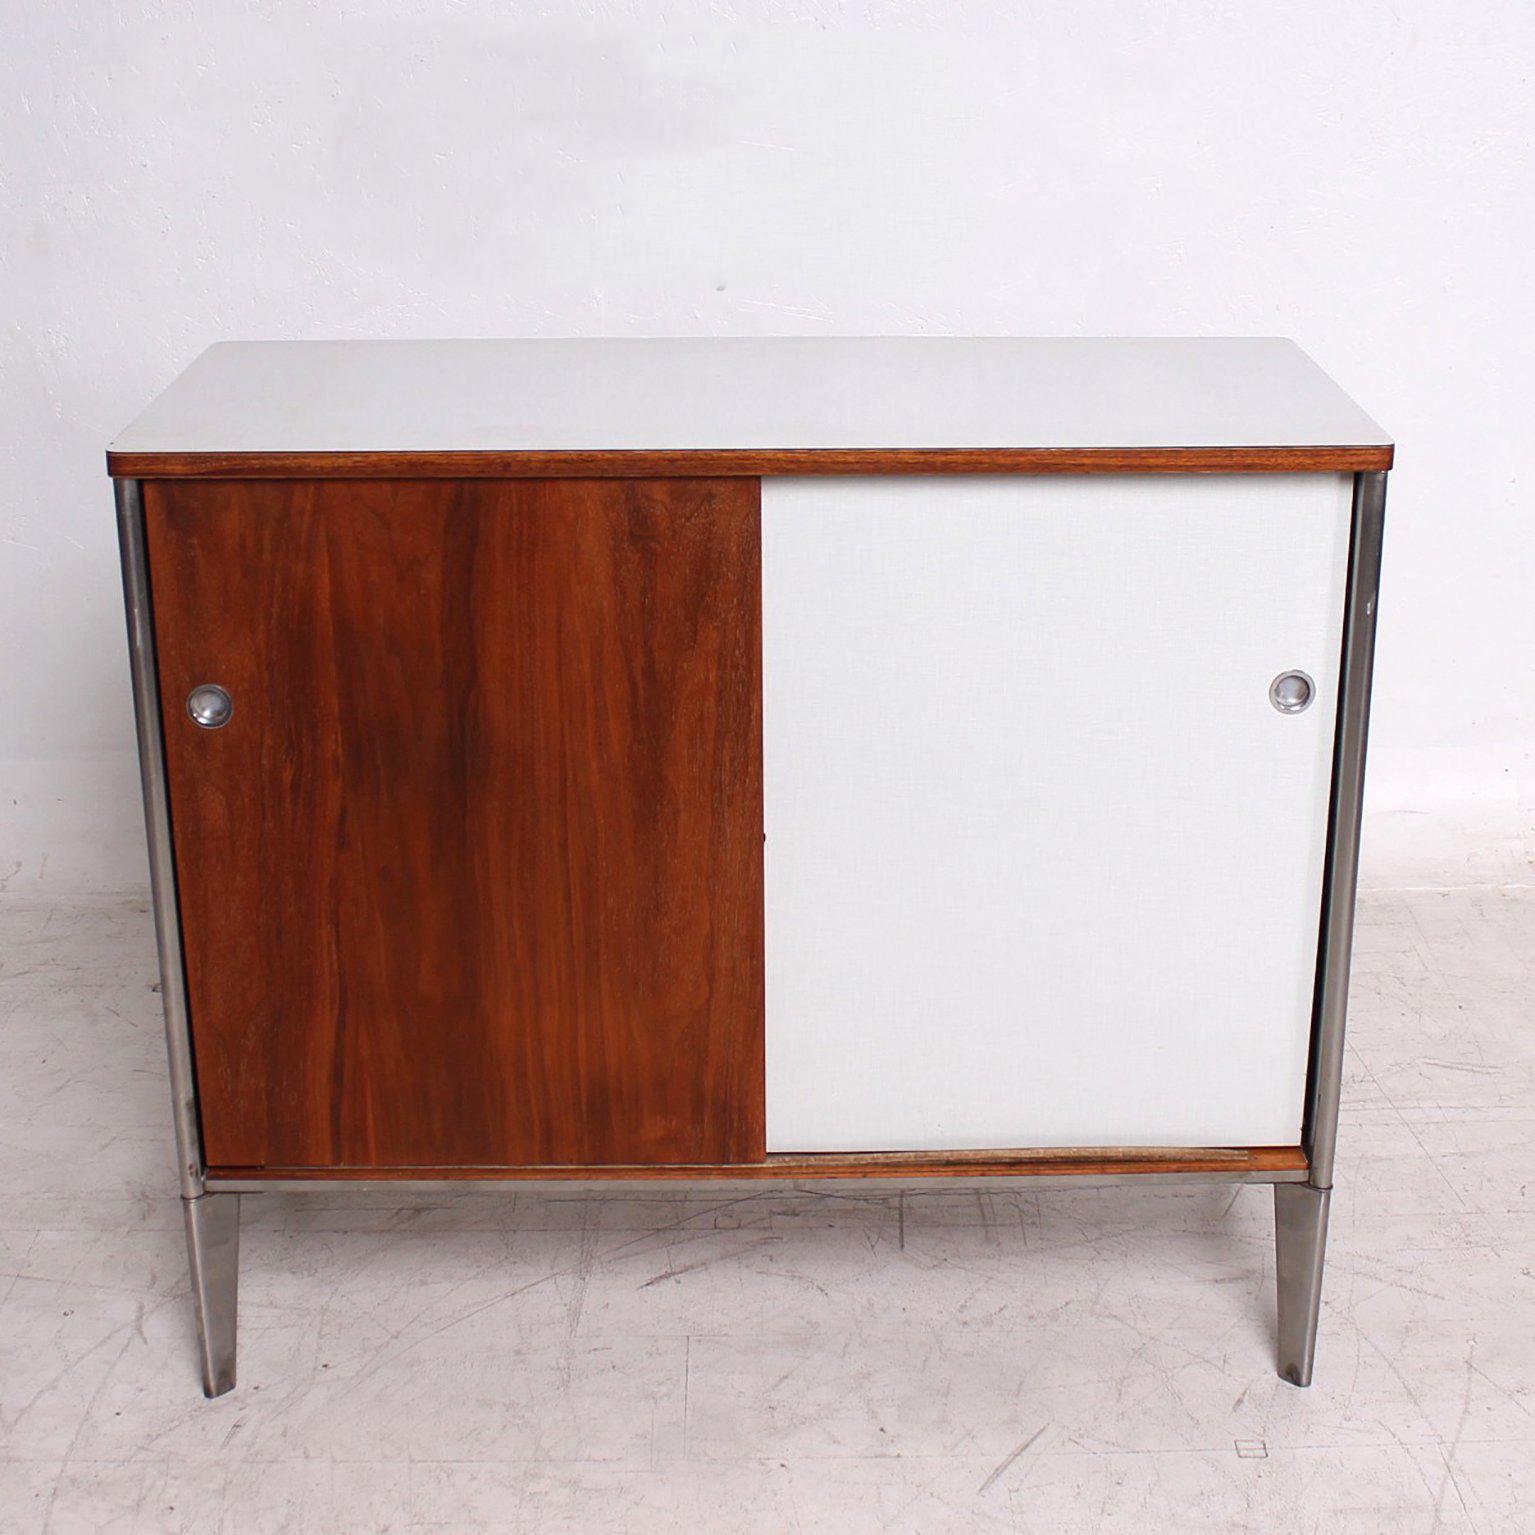 For your consideration a vintage Mid-Century Modern cabinet made of walnut plywood, stainless steel legs in sculptural tapered finish and light gray formica with a grid pattern graphics. 
The interior is painted in light green color and features two